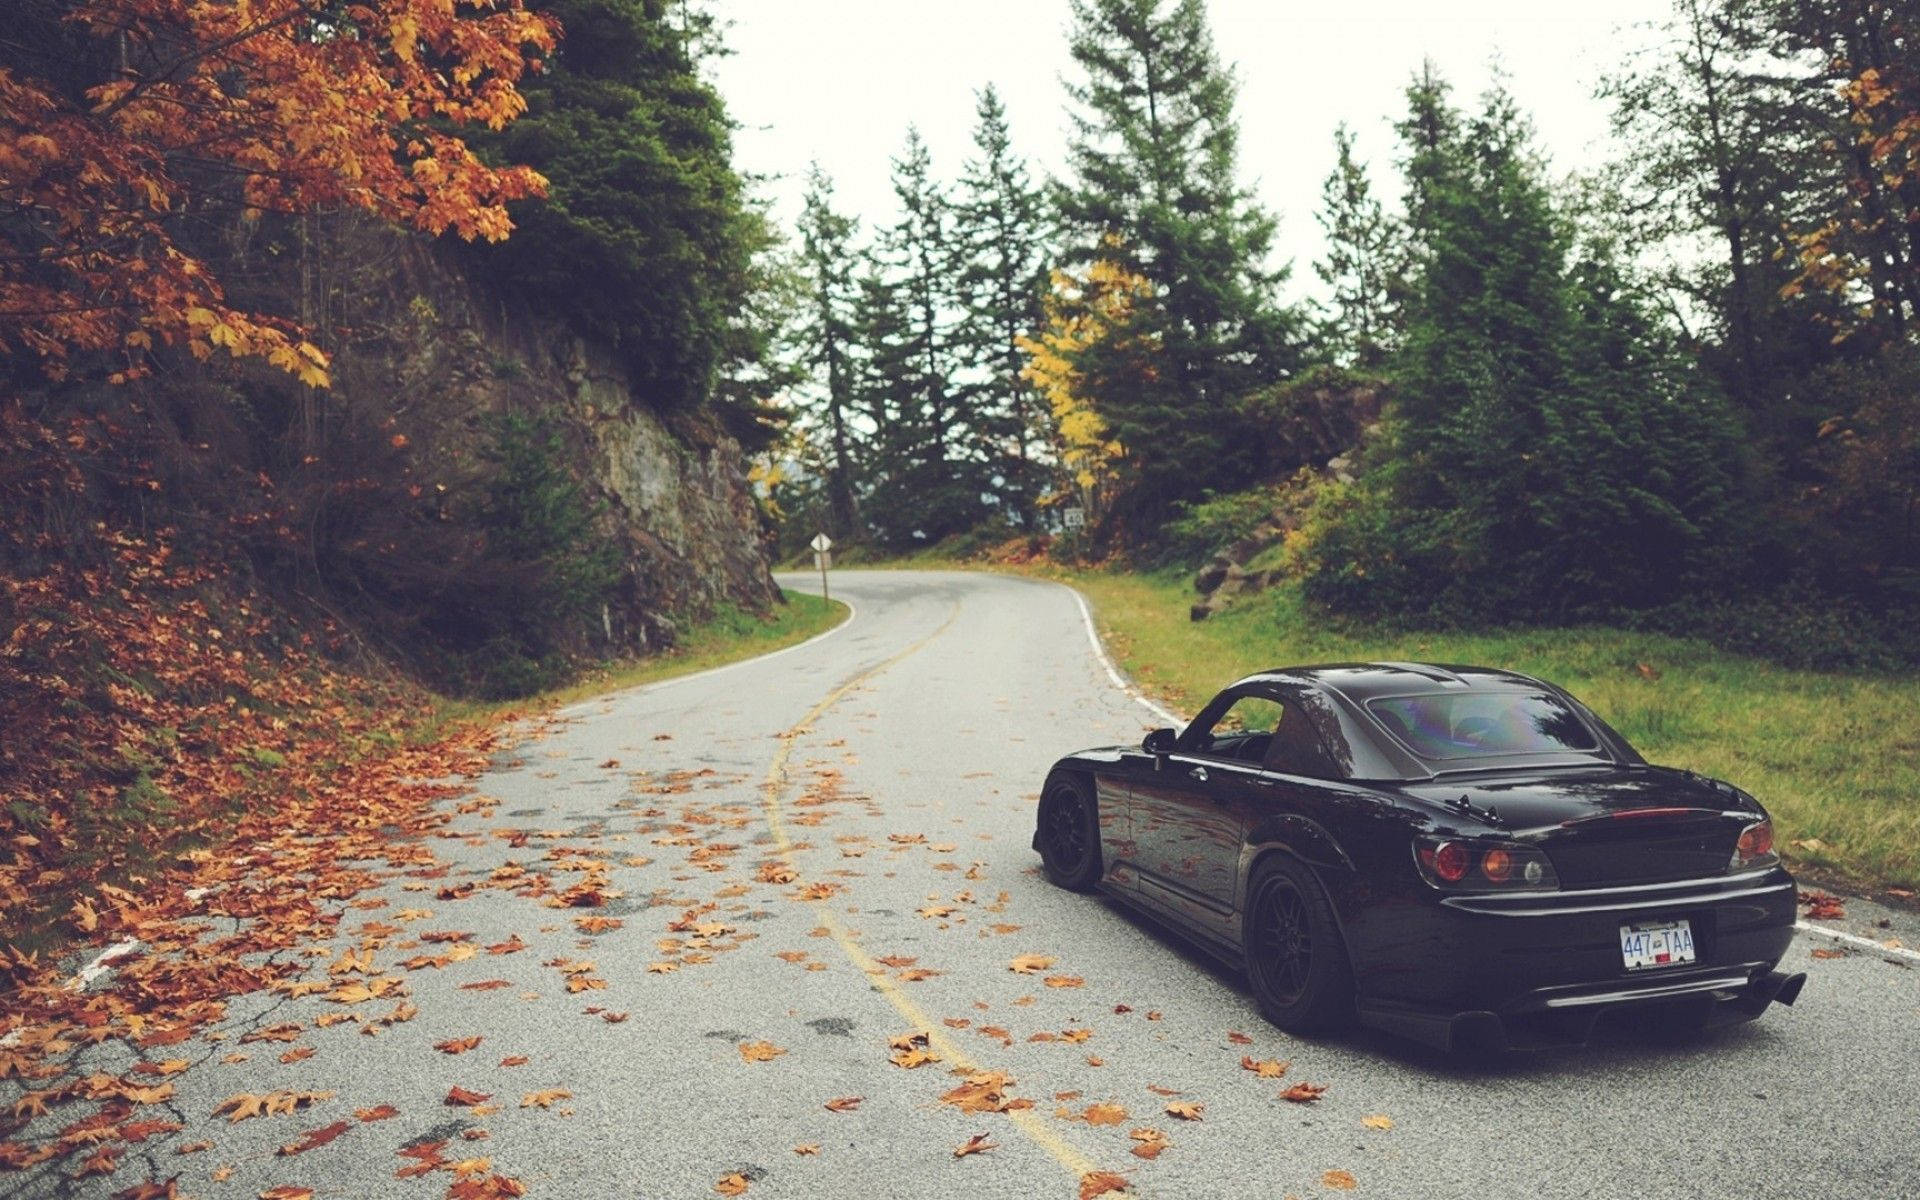 4k Jdm Honda S2000 With Autumn Leaves Background